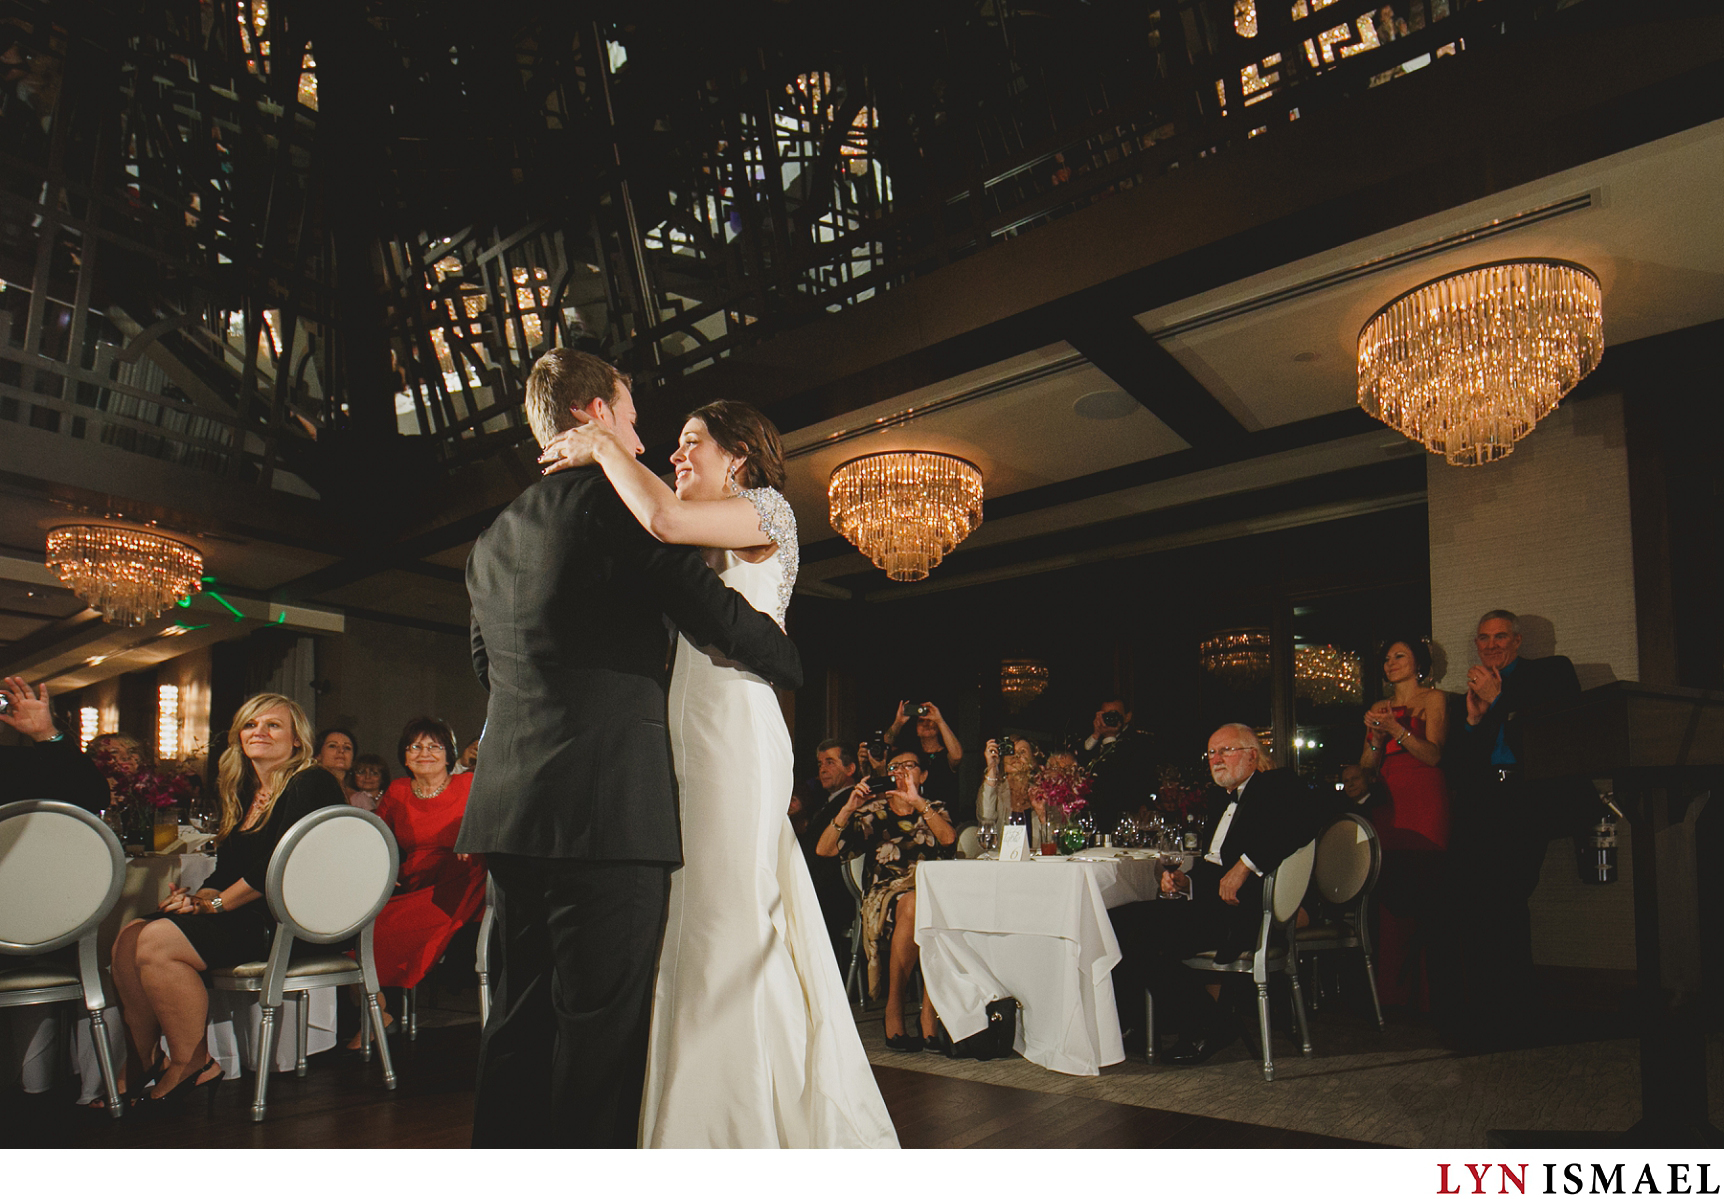 The bride and groom's first dance inside the Grandview Room of Whistle Bear Golf Club.